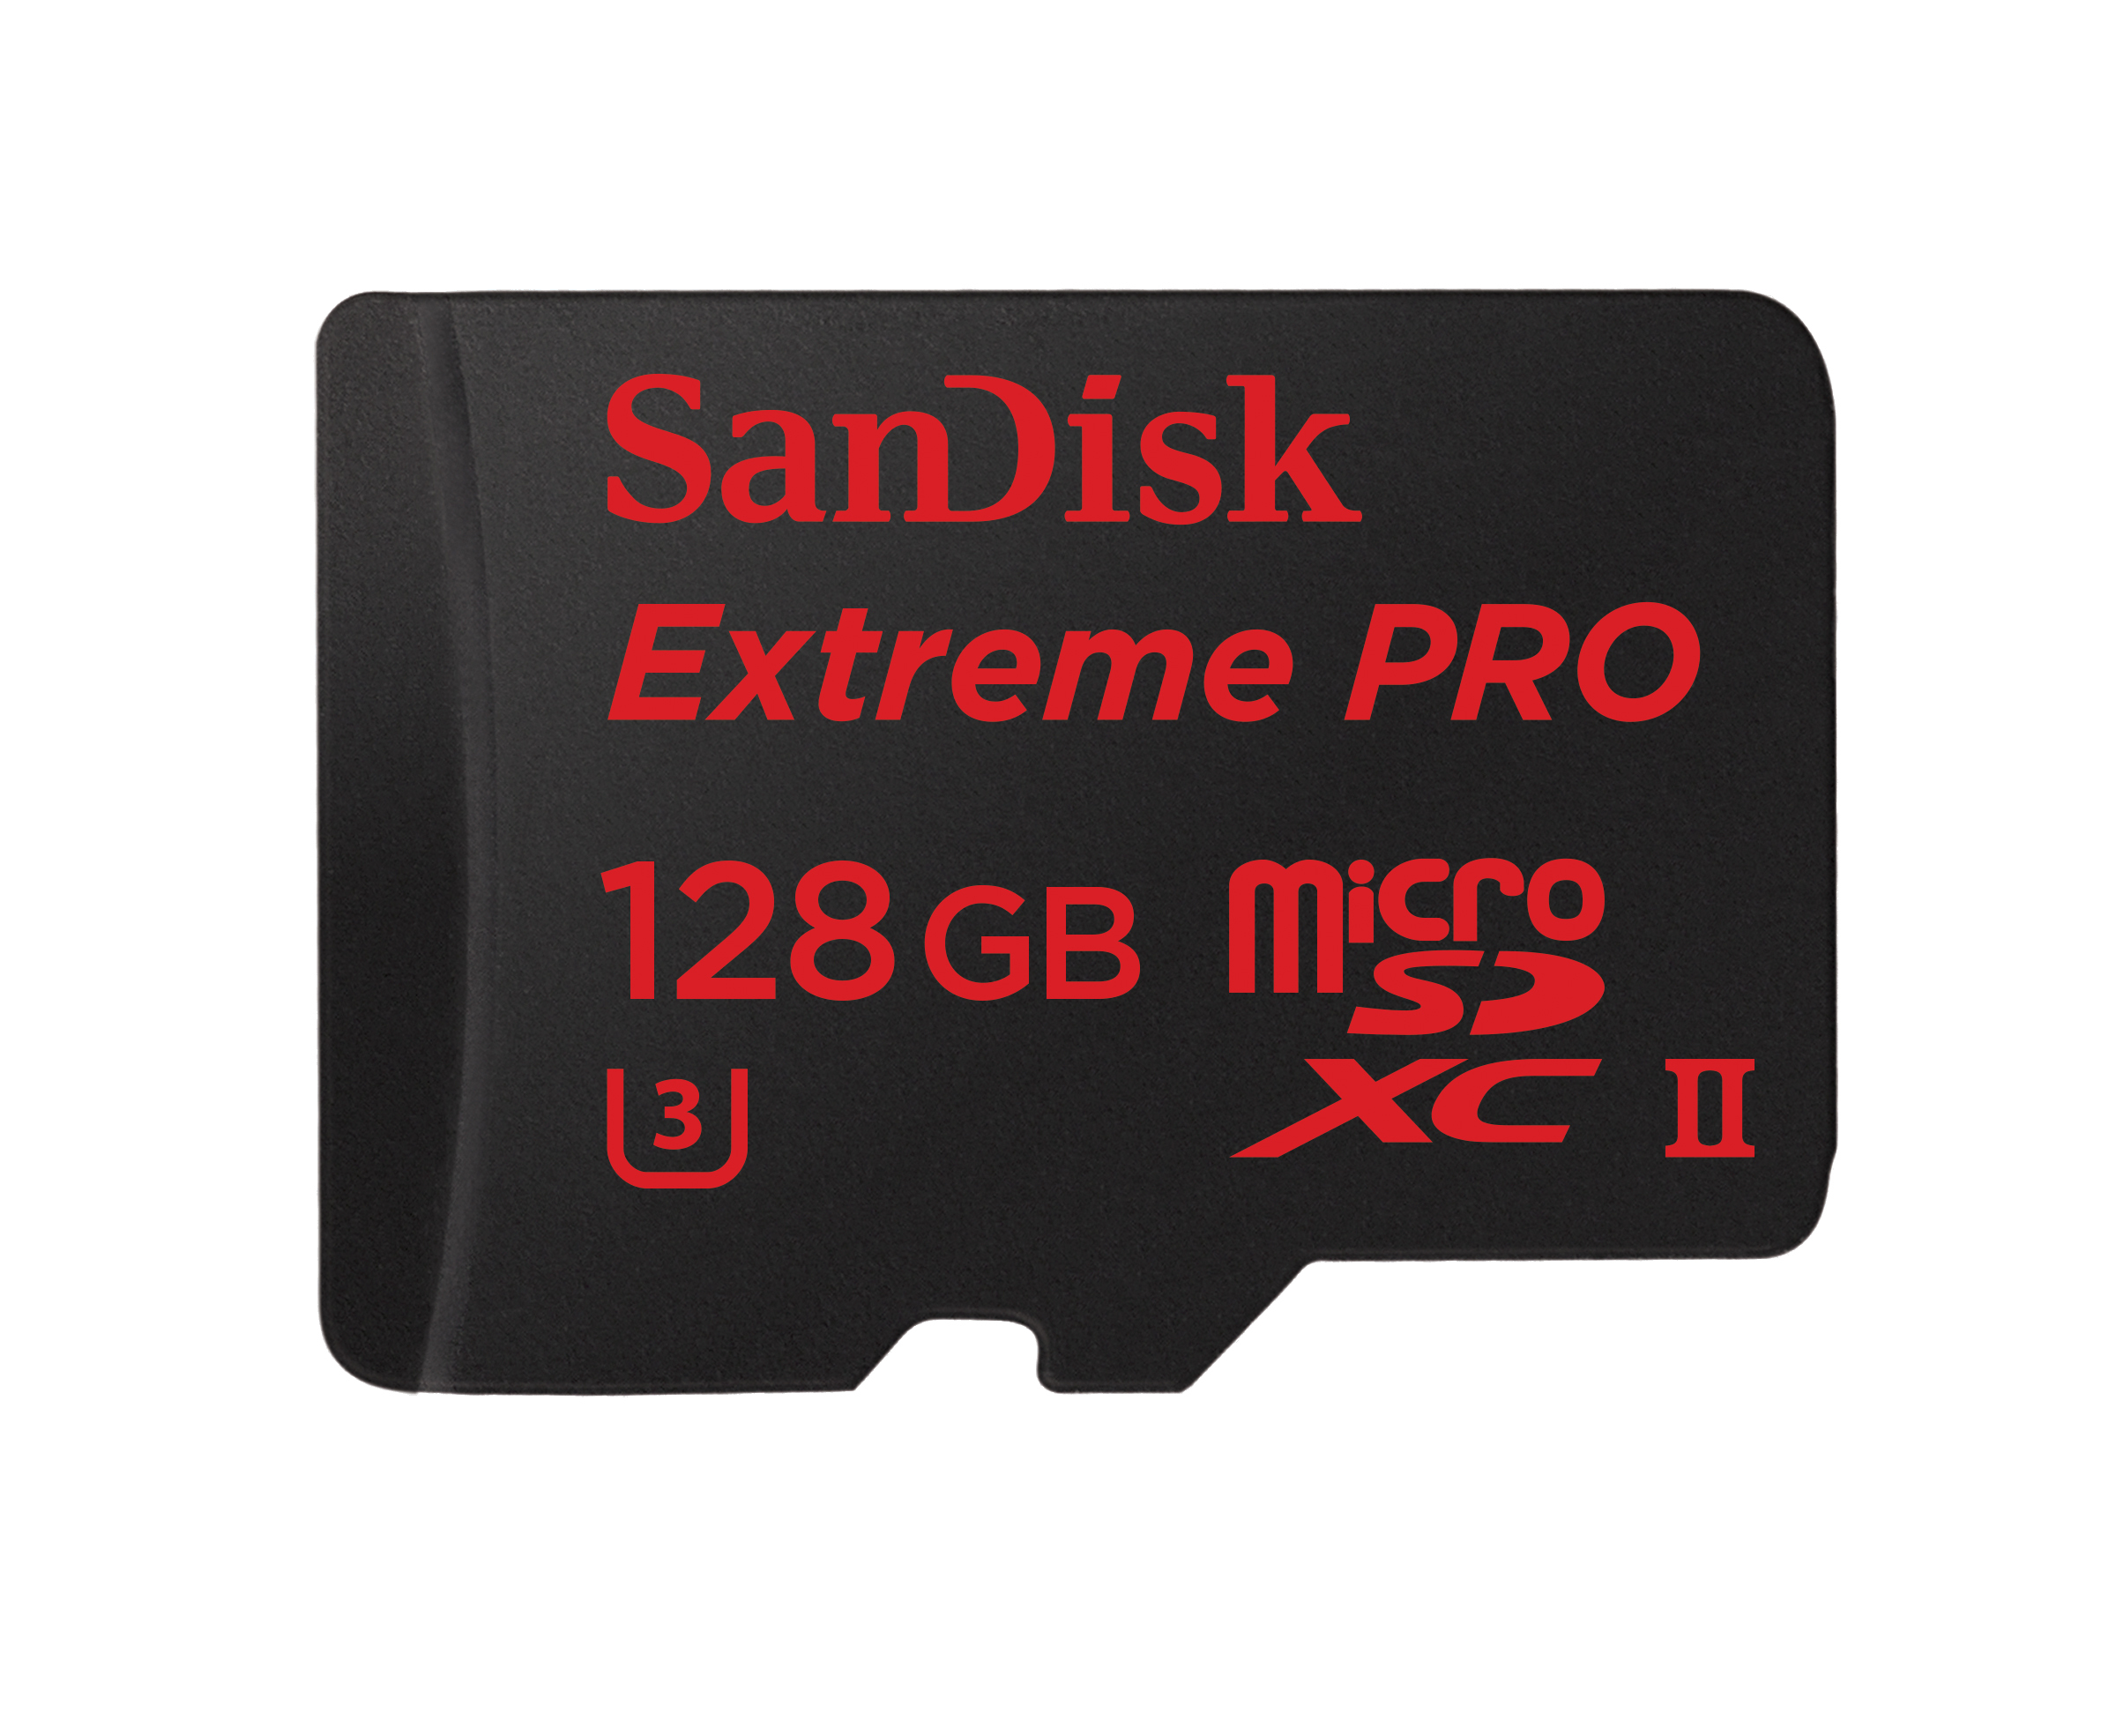 SanDisk Launches Next-Generation microSD Card Featuring World's